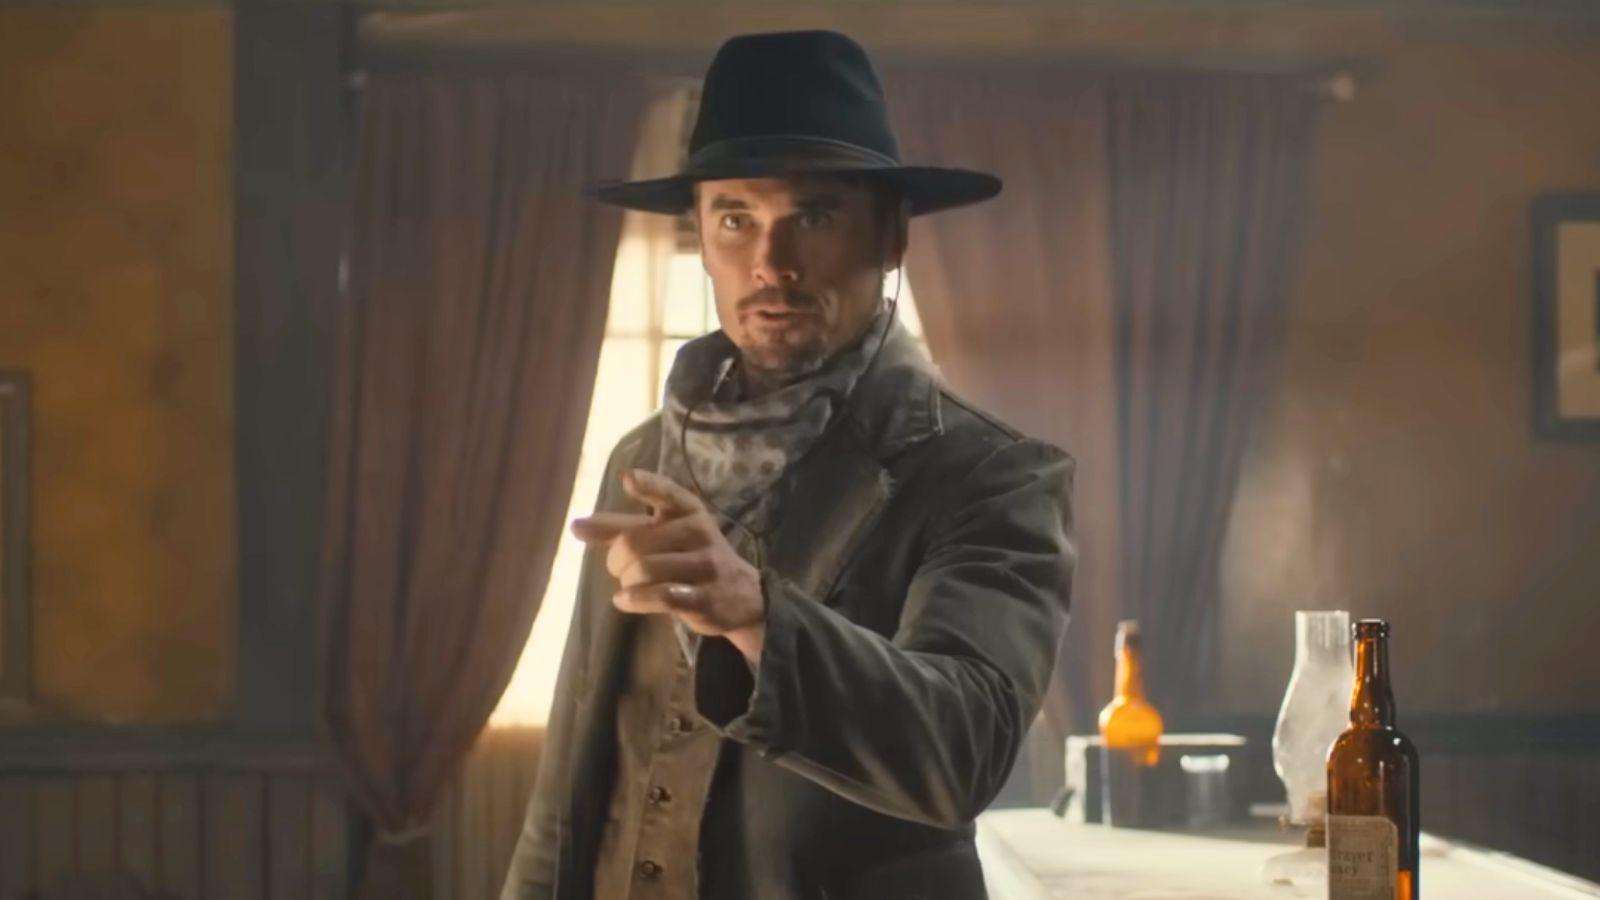 Shawn Parsons as The Gunfighter.